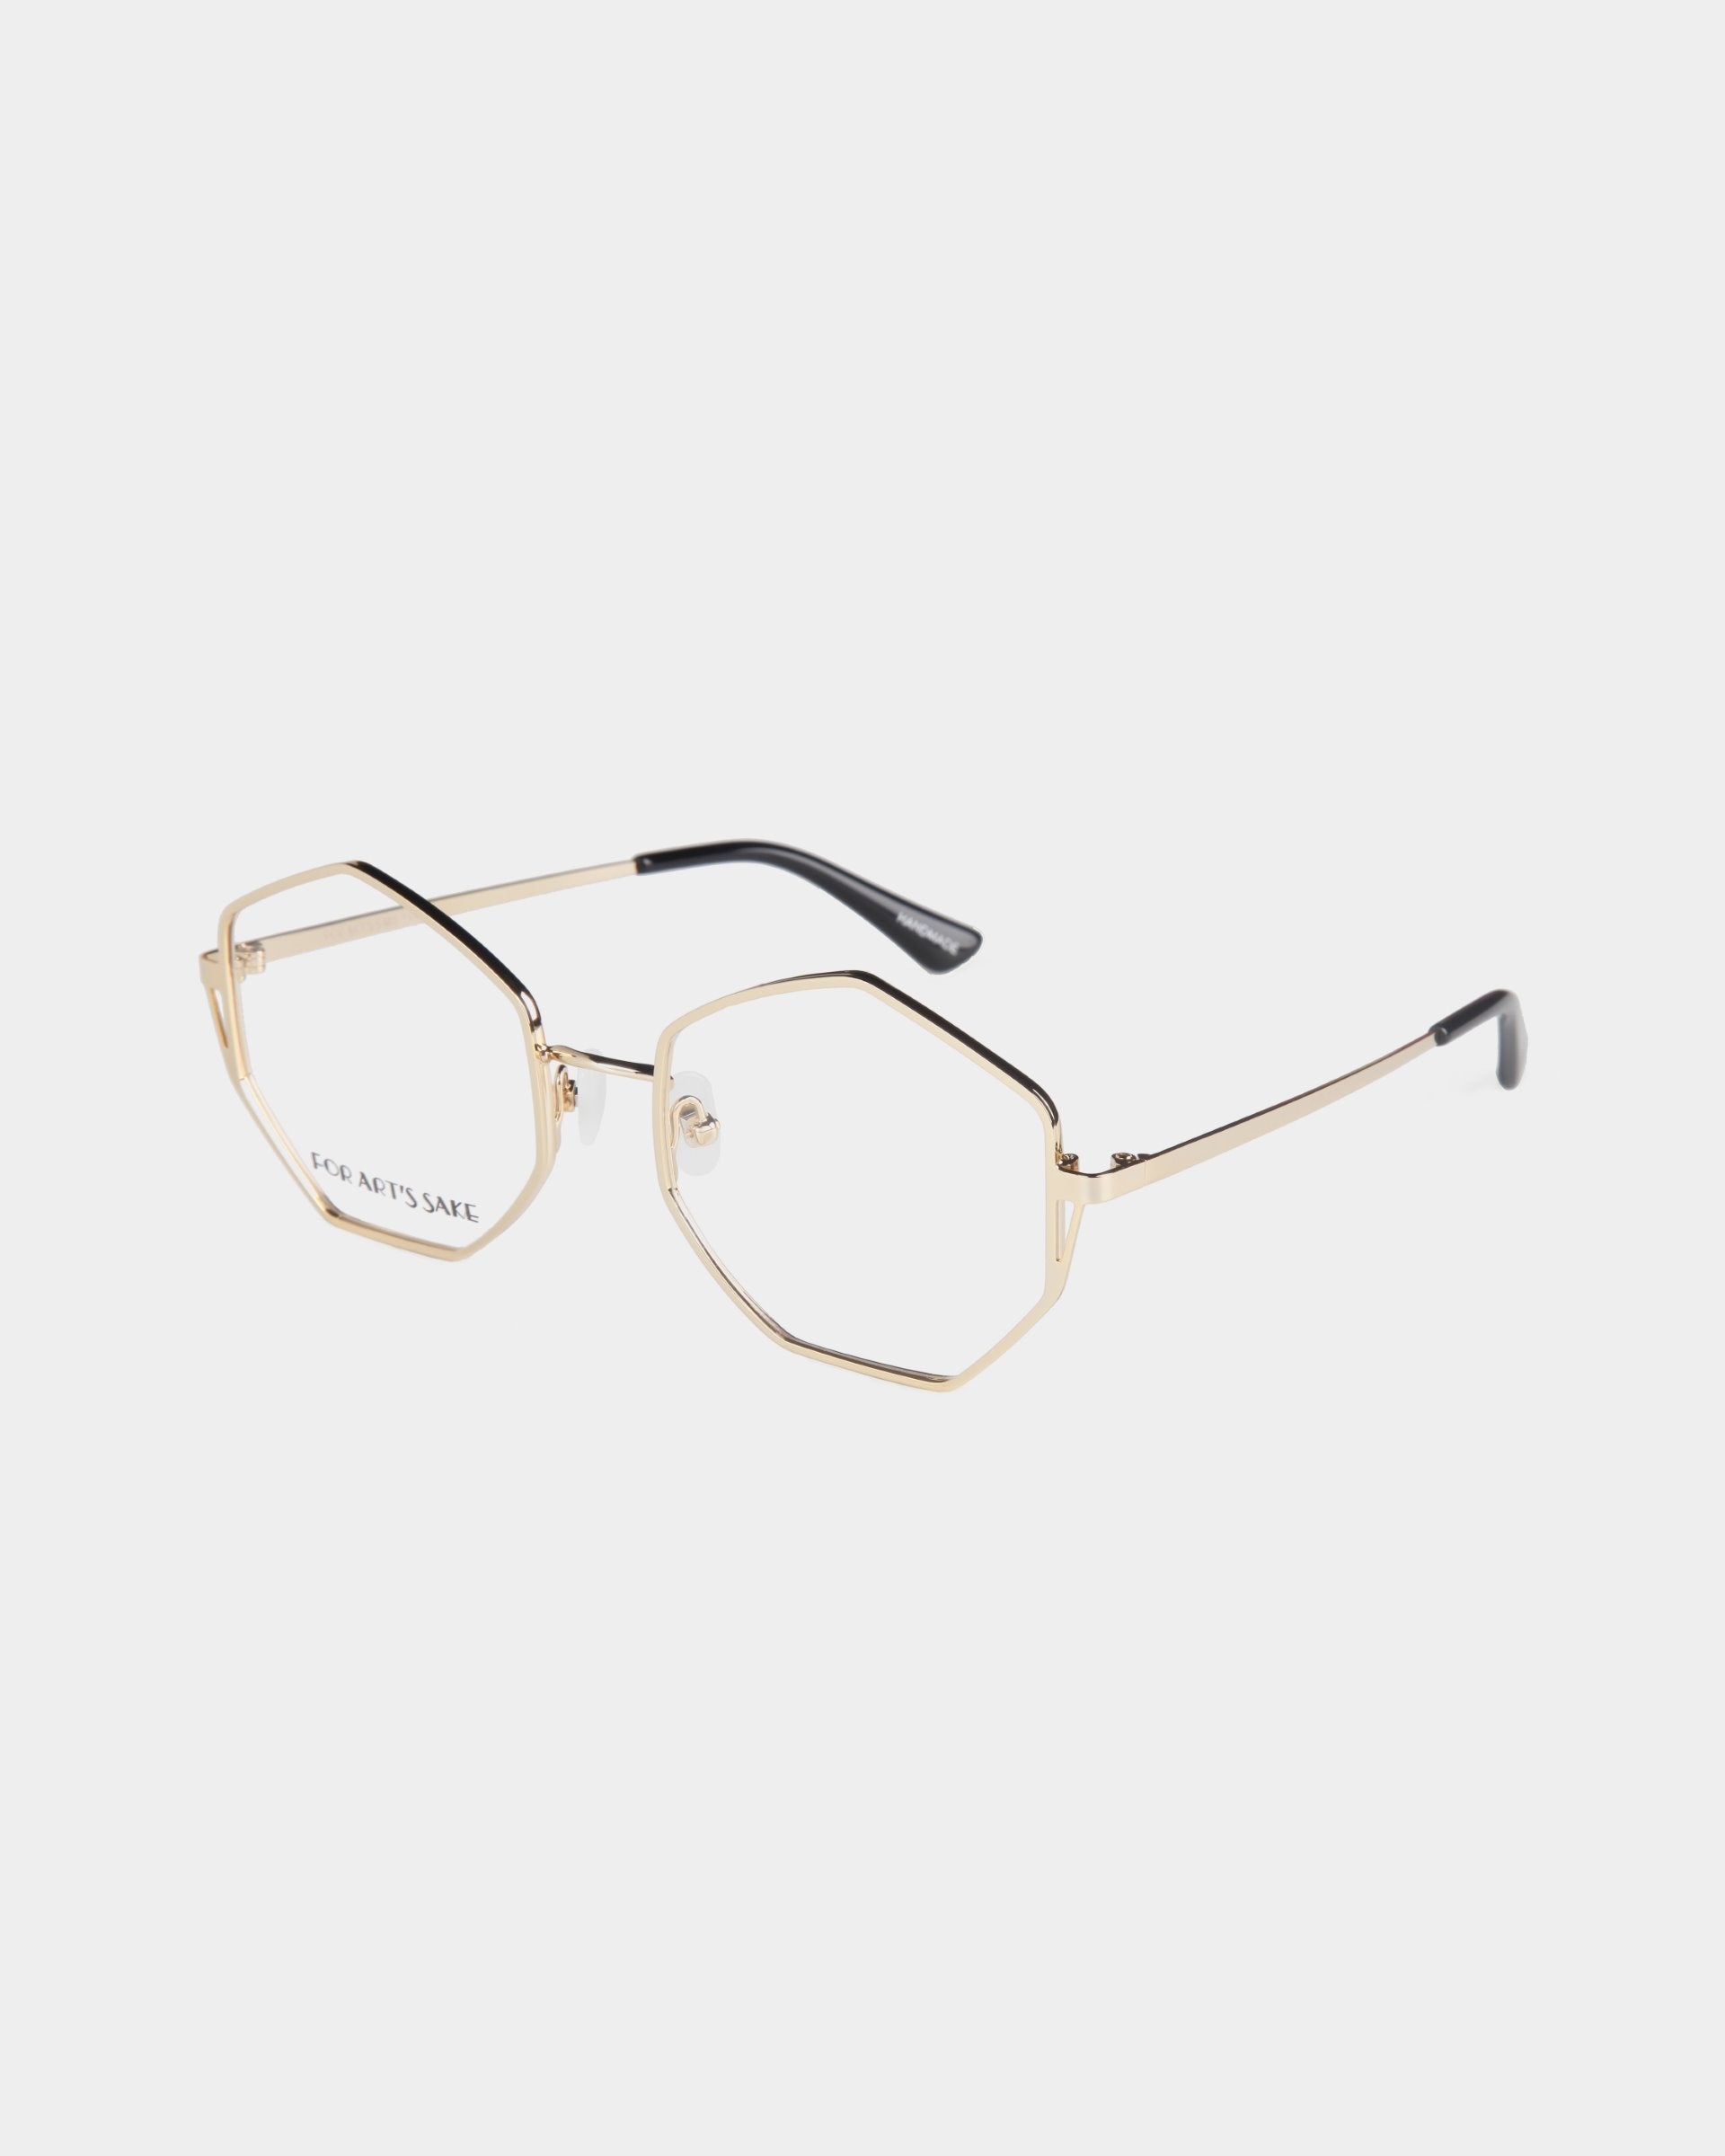 A pair of geometric gold-framed eyeglasses with heptagon-shaped lenses, black temple tips, and adjustable jade nose pads, displayed on a white background. The product name is Antidote by For Art&#39;s Sake®.